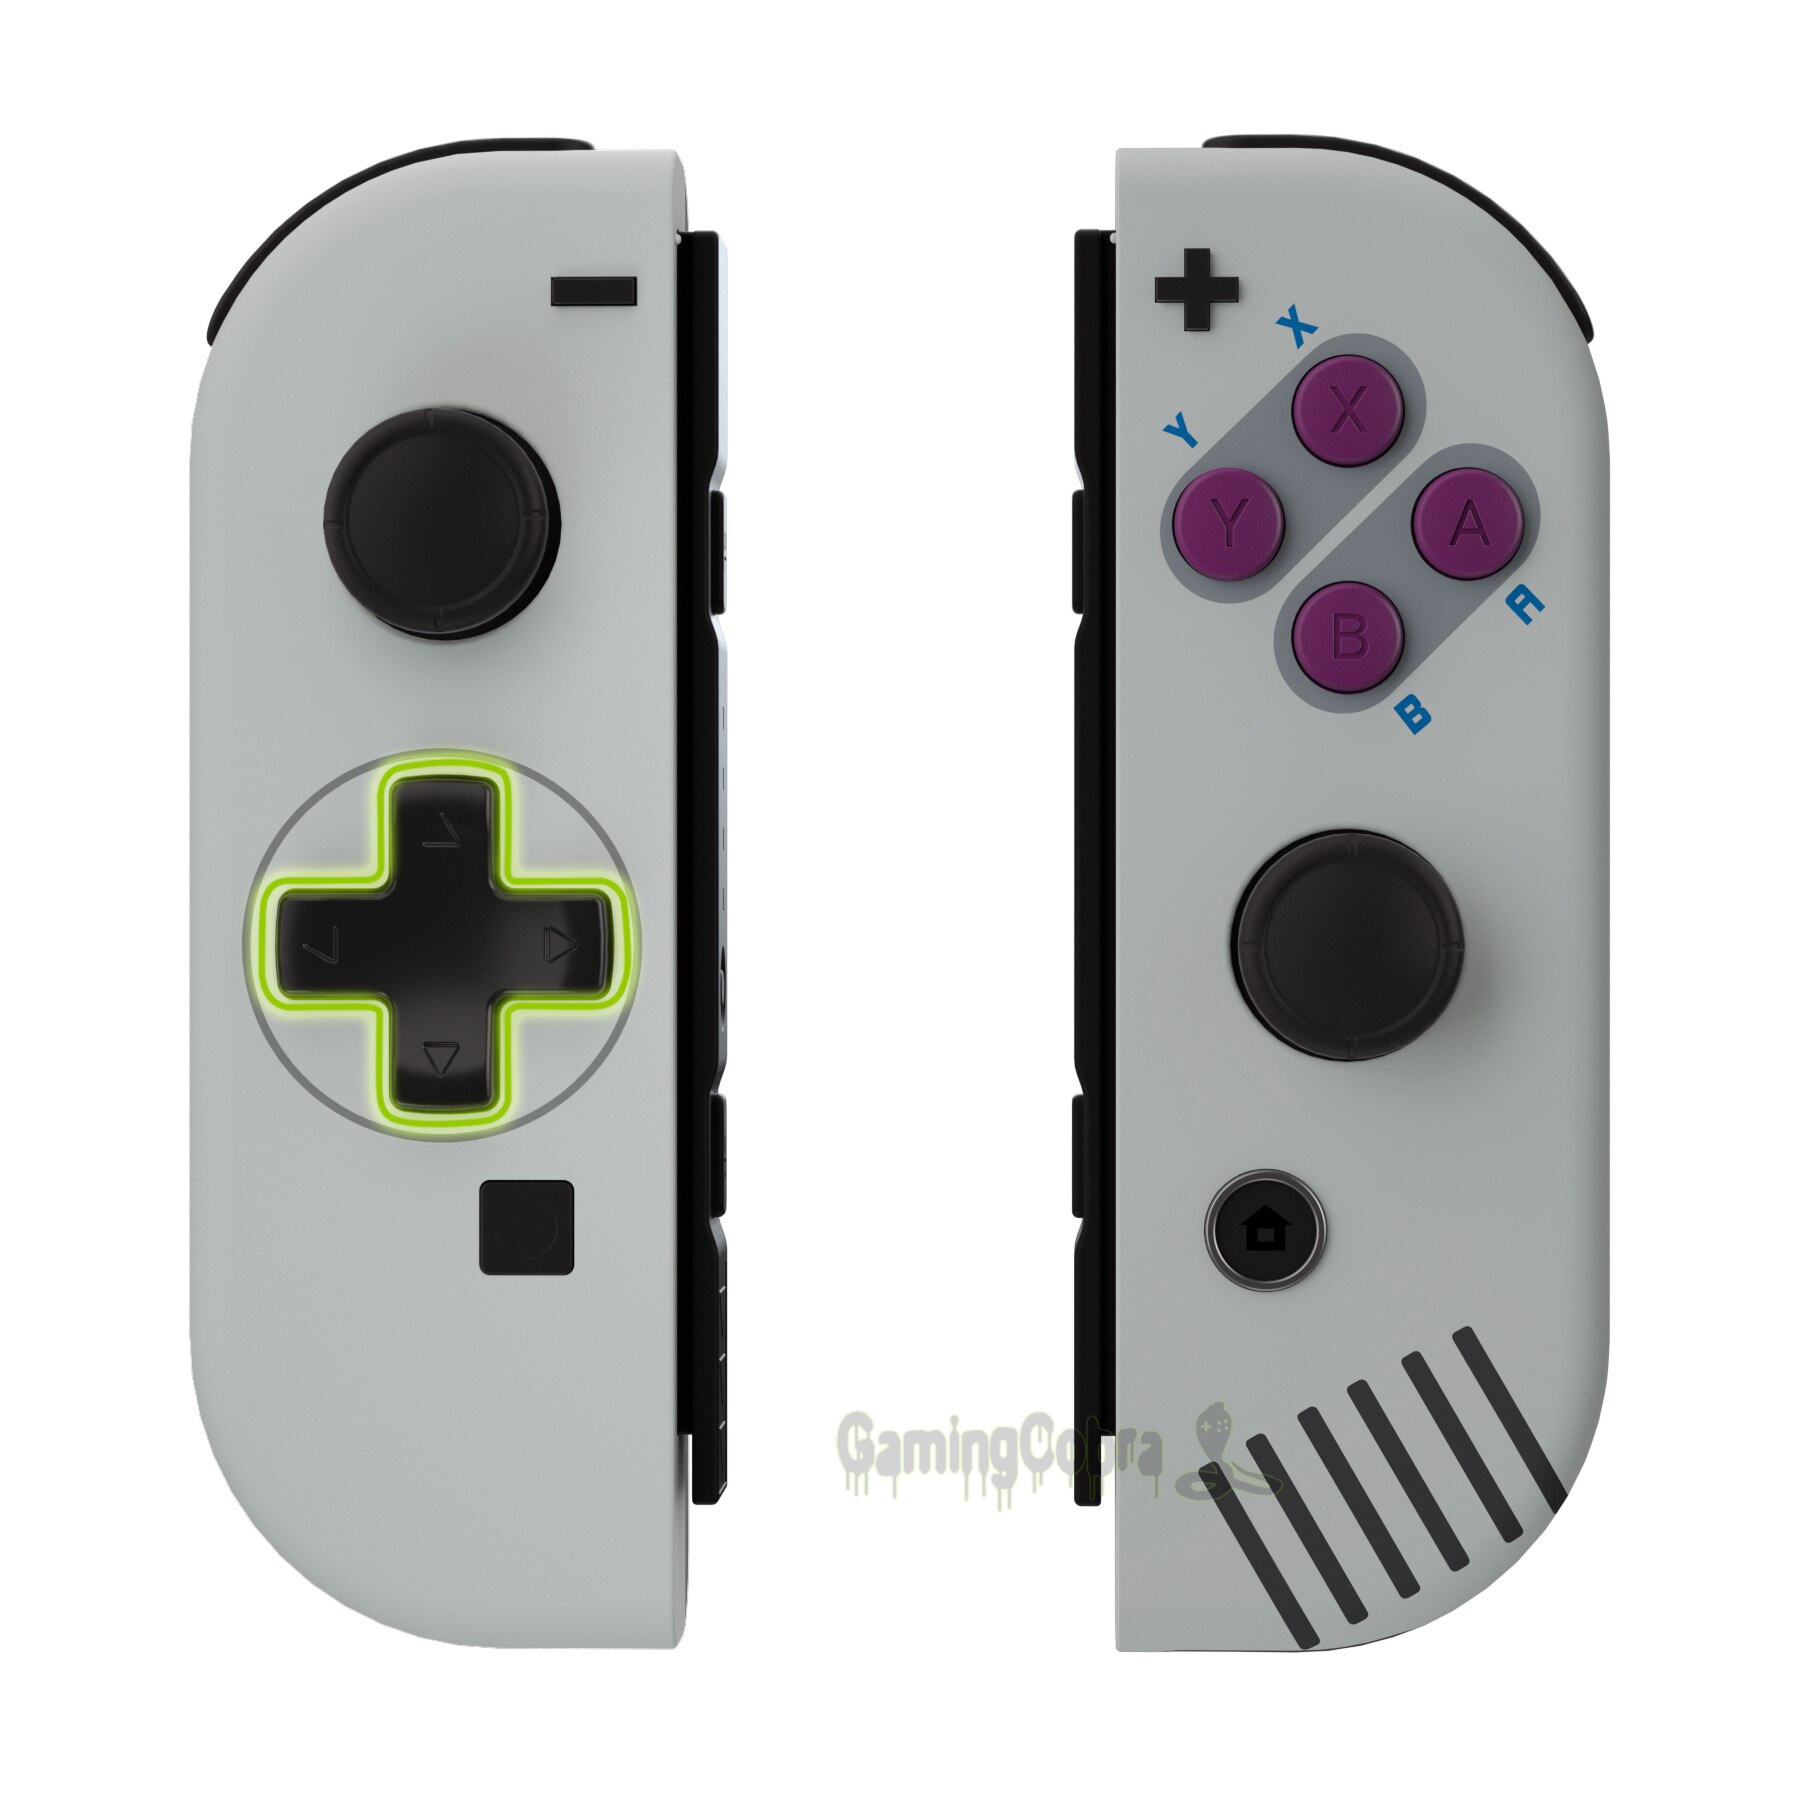 Extremerate classic 1989 gb dmg -01 controllerhus skal (d-pad version) med dpad abxy knapper til ns switch &amp; oled joycon